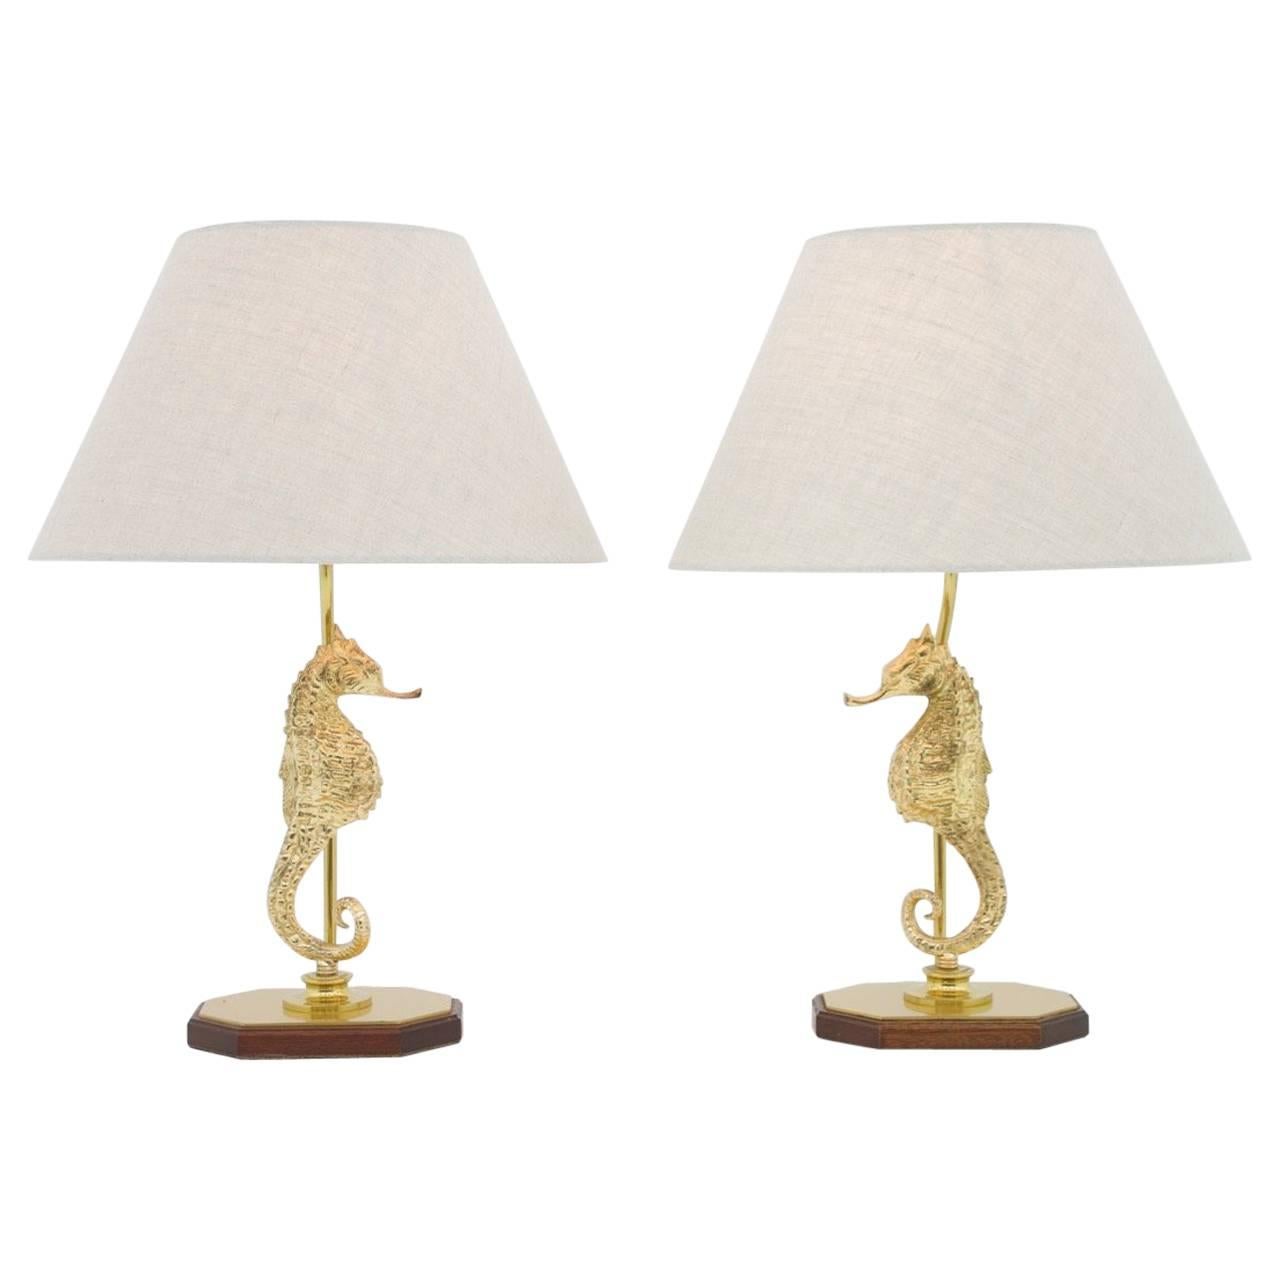 Seahorse Table Lamps in Brass 1970s